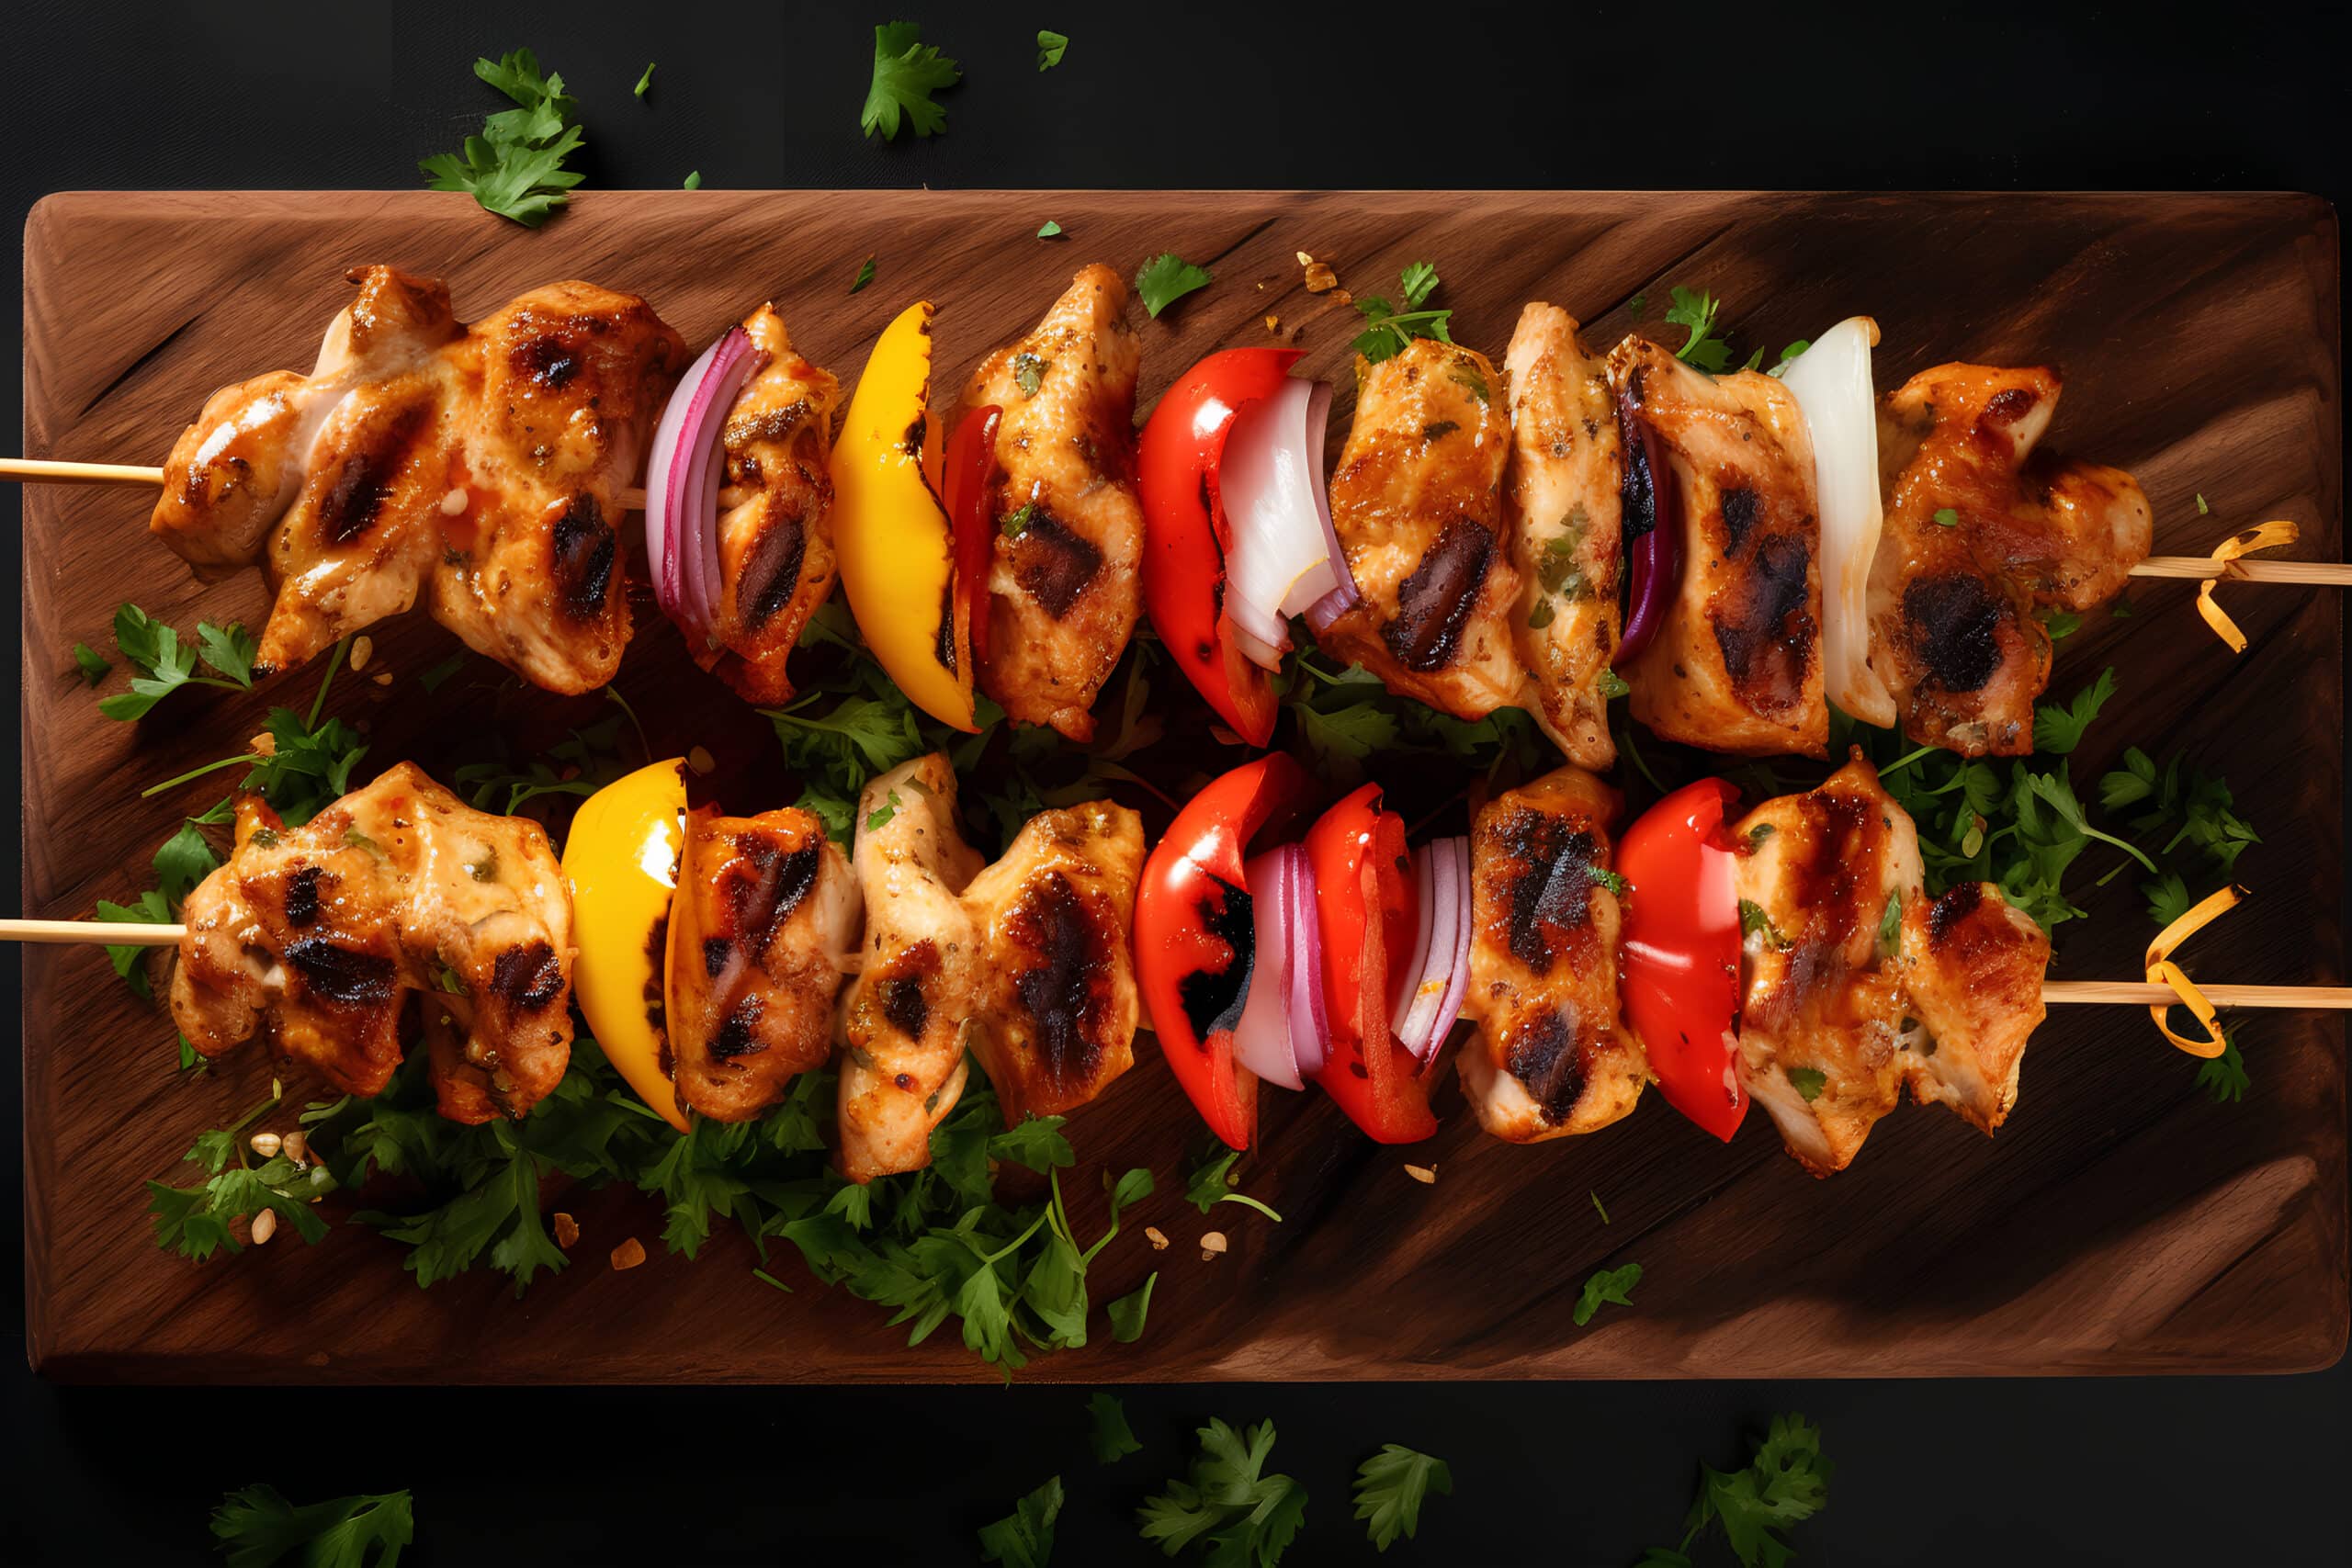 www.appr.com : How Long To Grill Chicken Kabobs On Gas Grill?